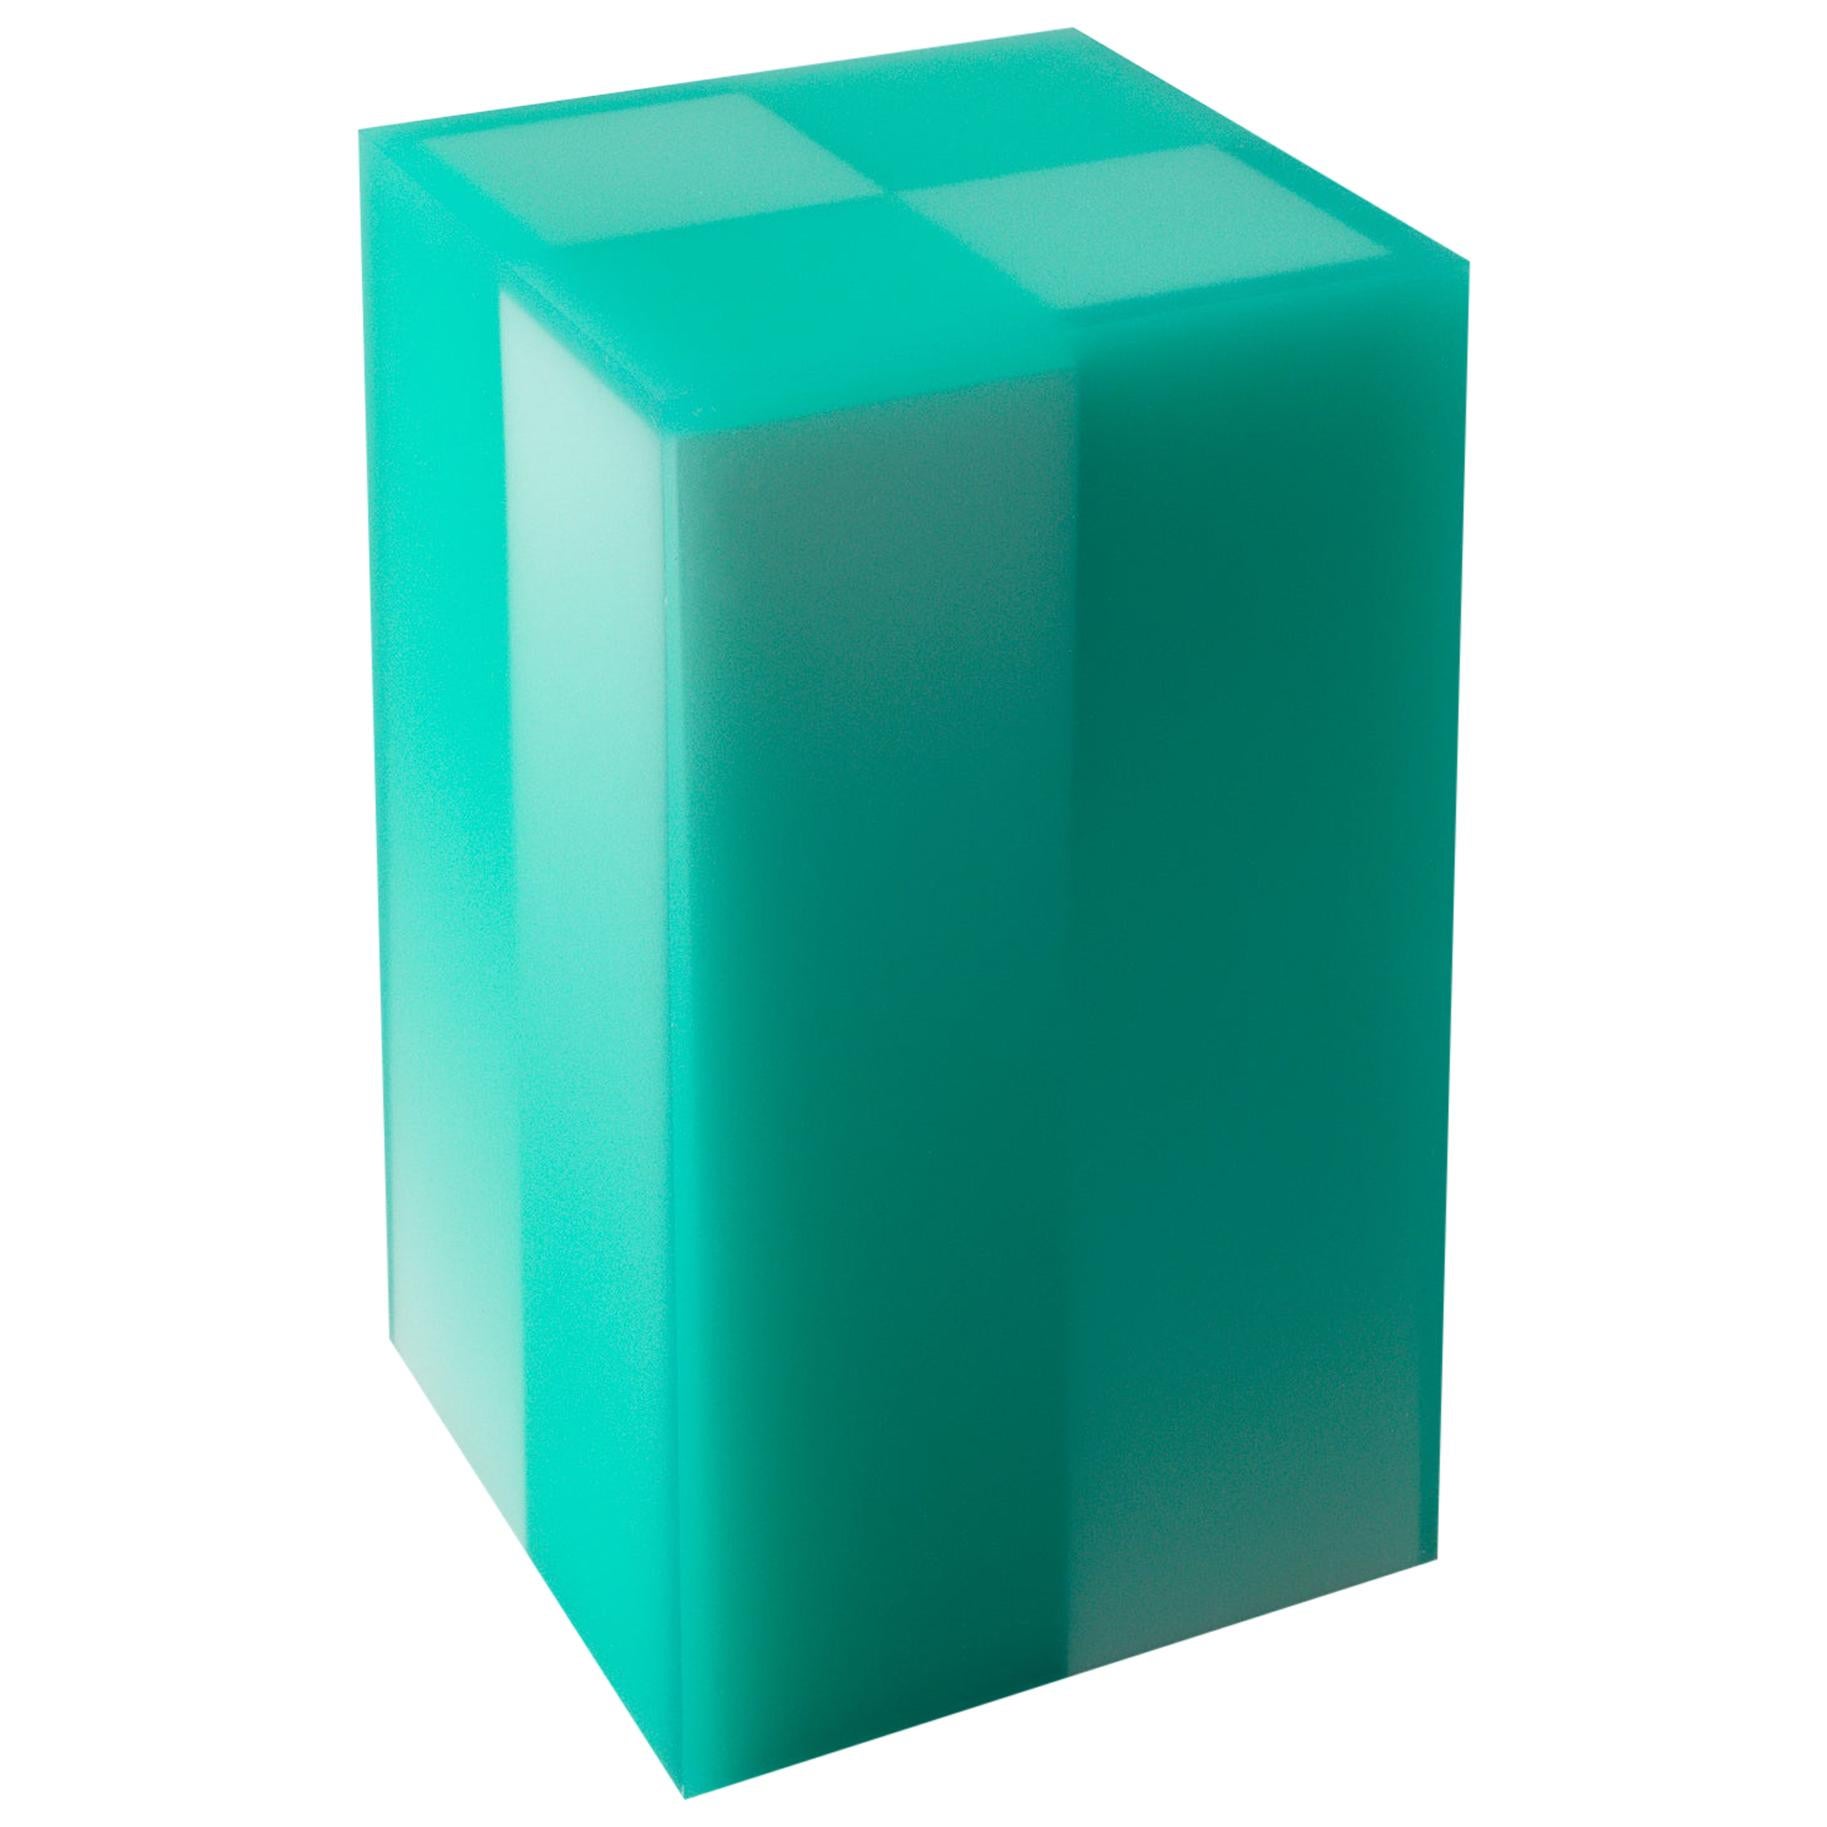 Four Way Shift Resin Side Table/Stool Turquoise by Facture REPby Tuleste Factory For Sale